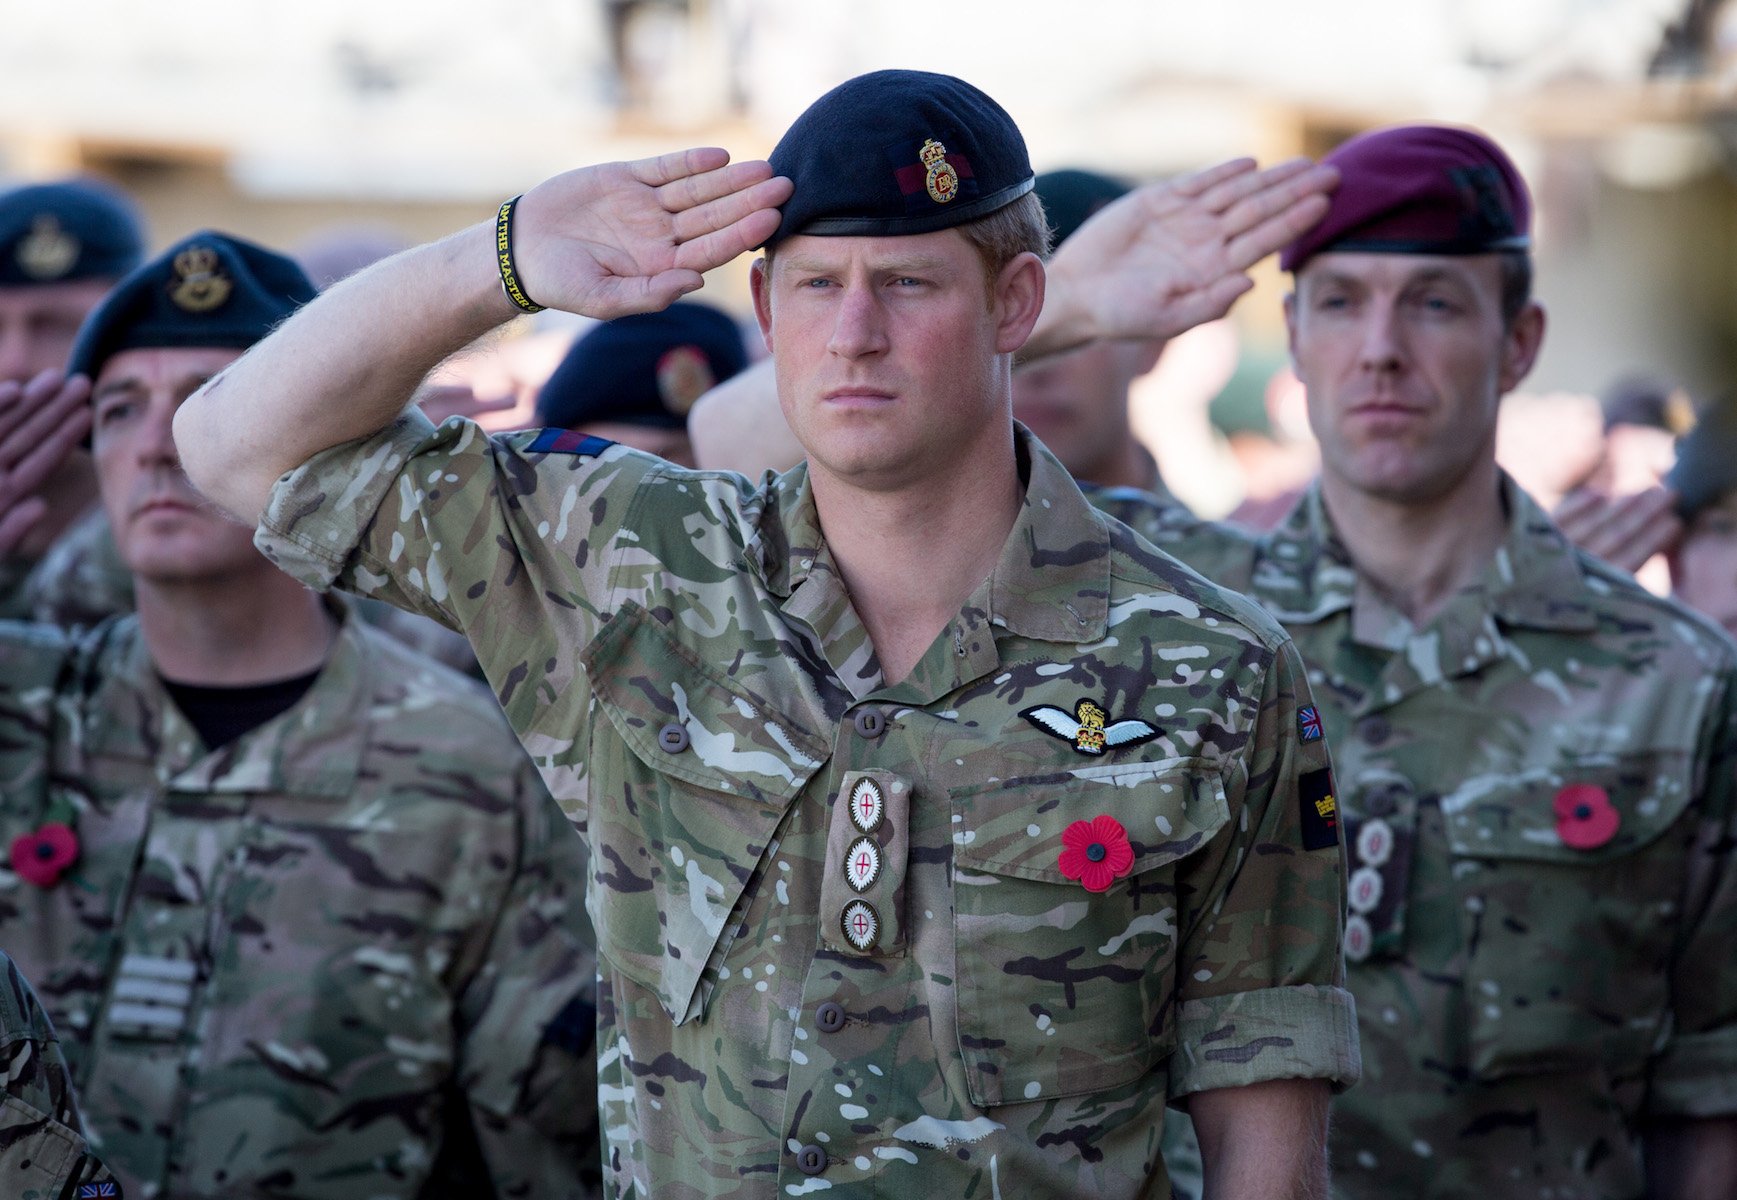 Prince Harry served 10 years in the military.